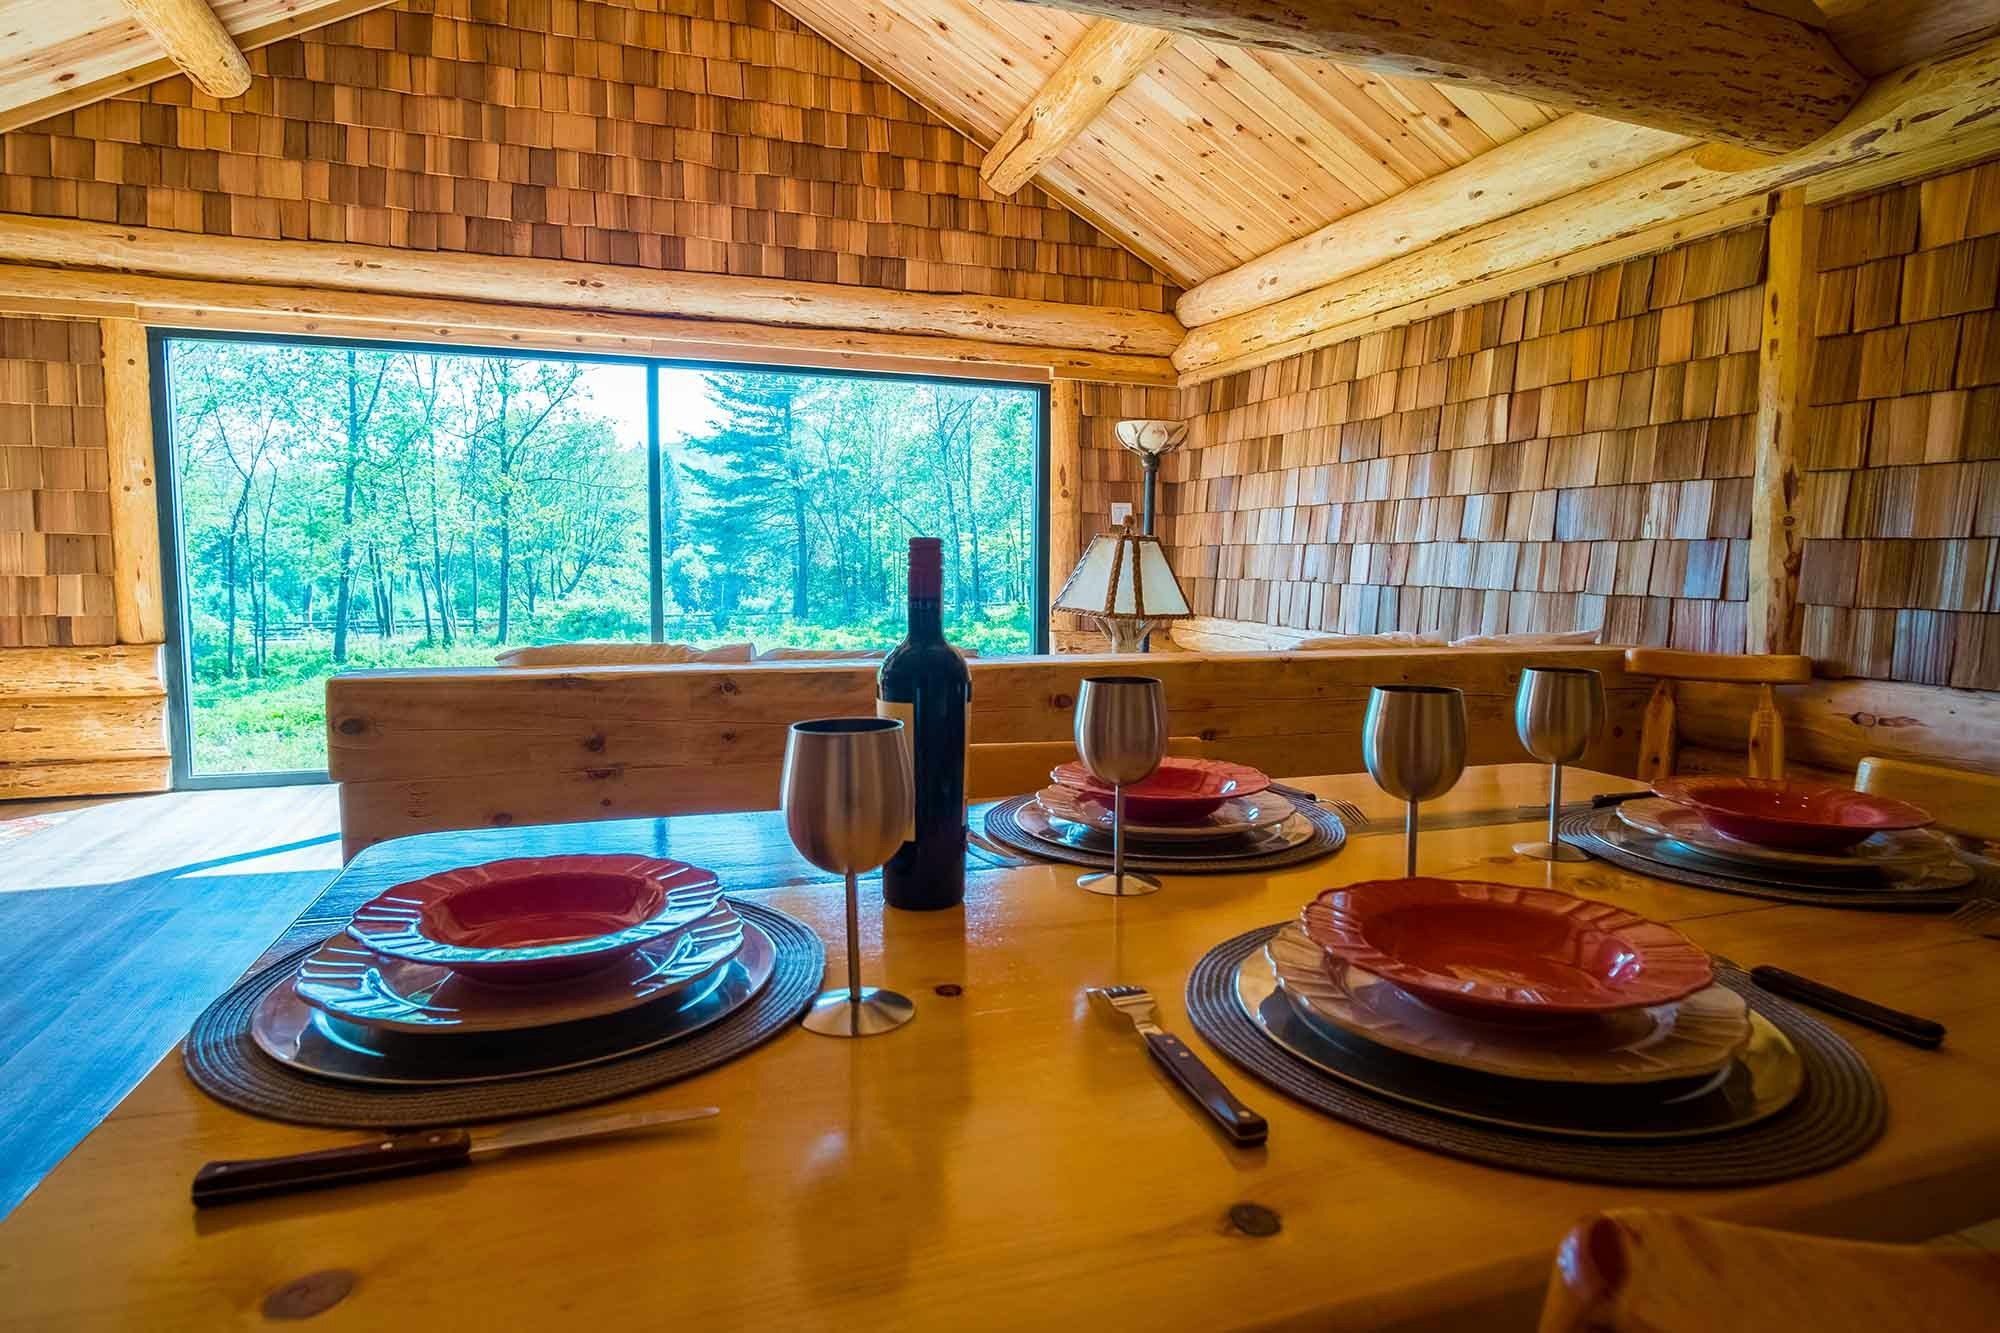 Experience this 'wolf cabin' at Parc Omega